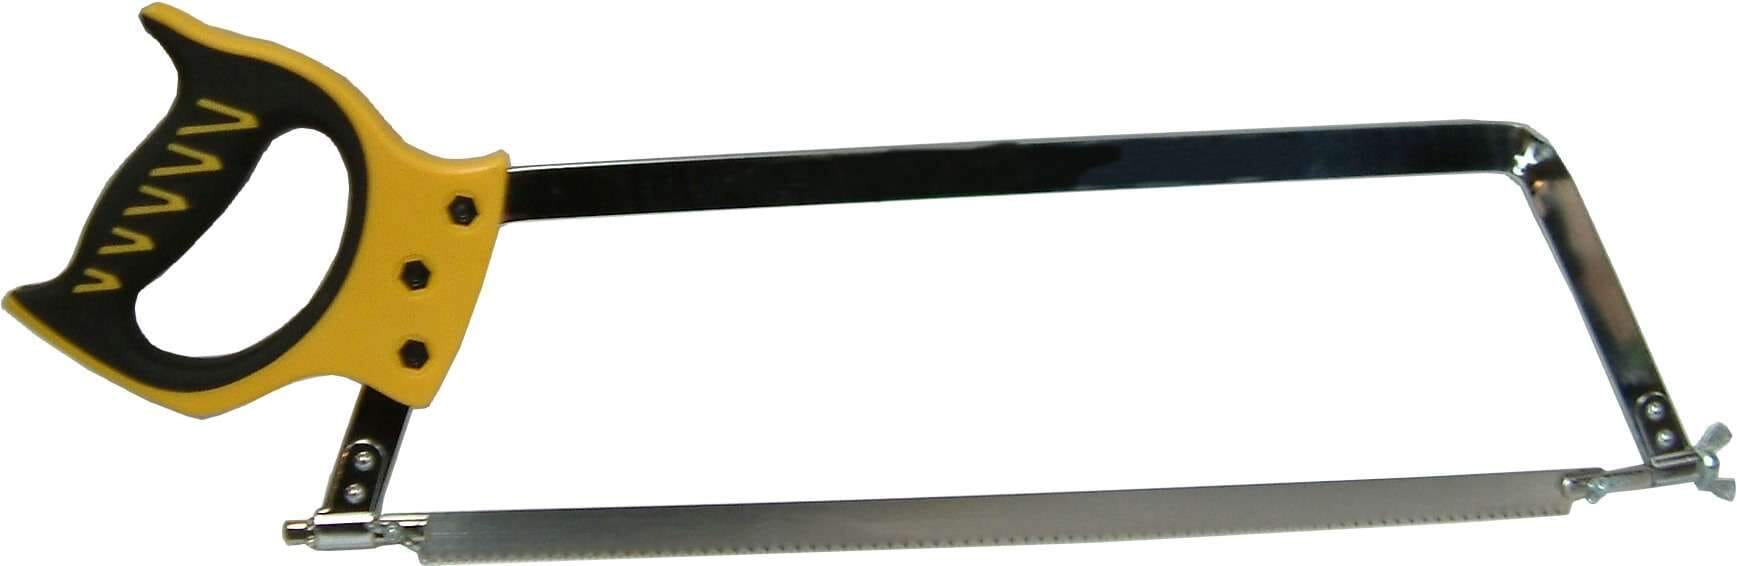 Buffalo Butchers Saw Stainless Steel with Plastic Handle 450mm